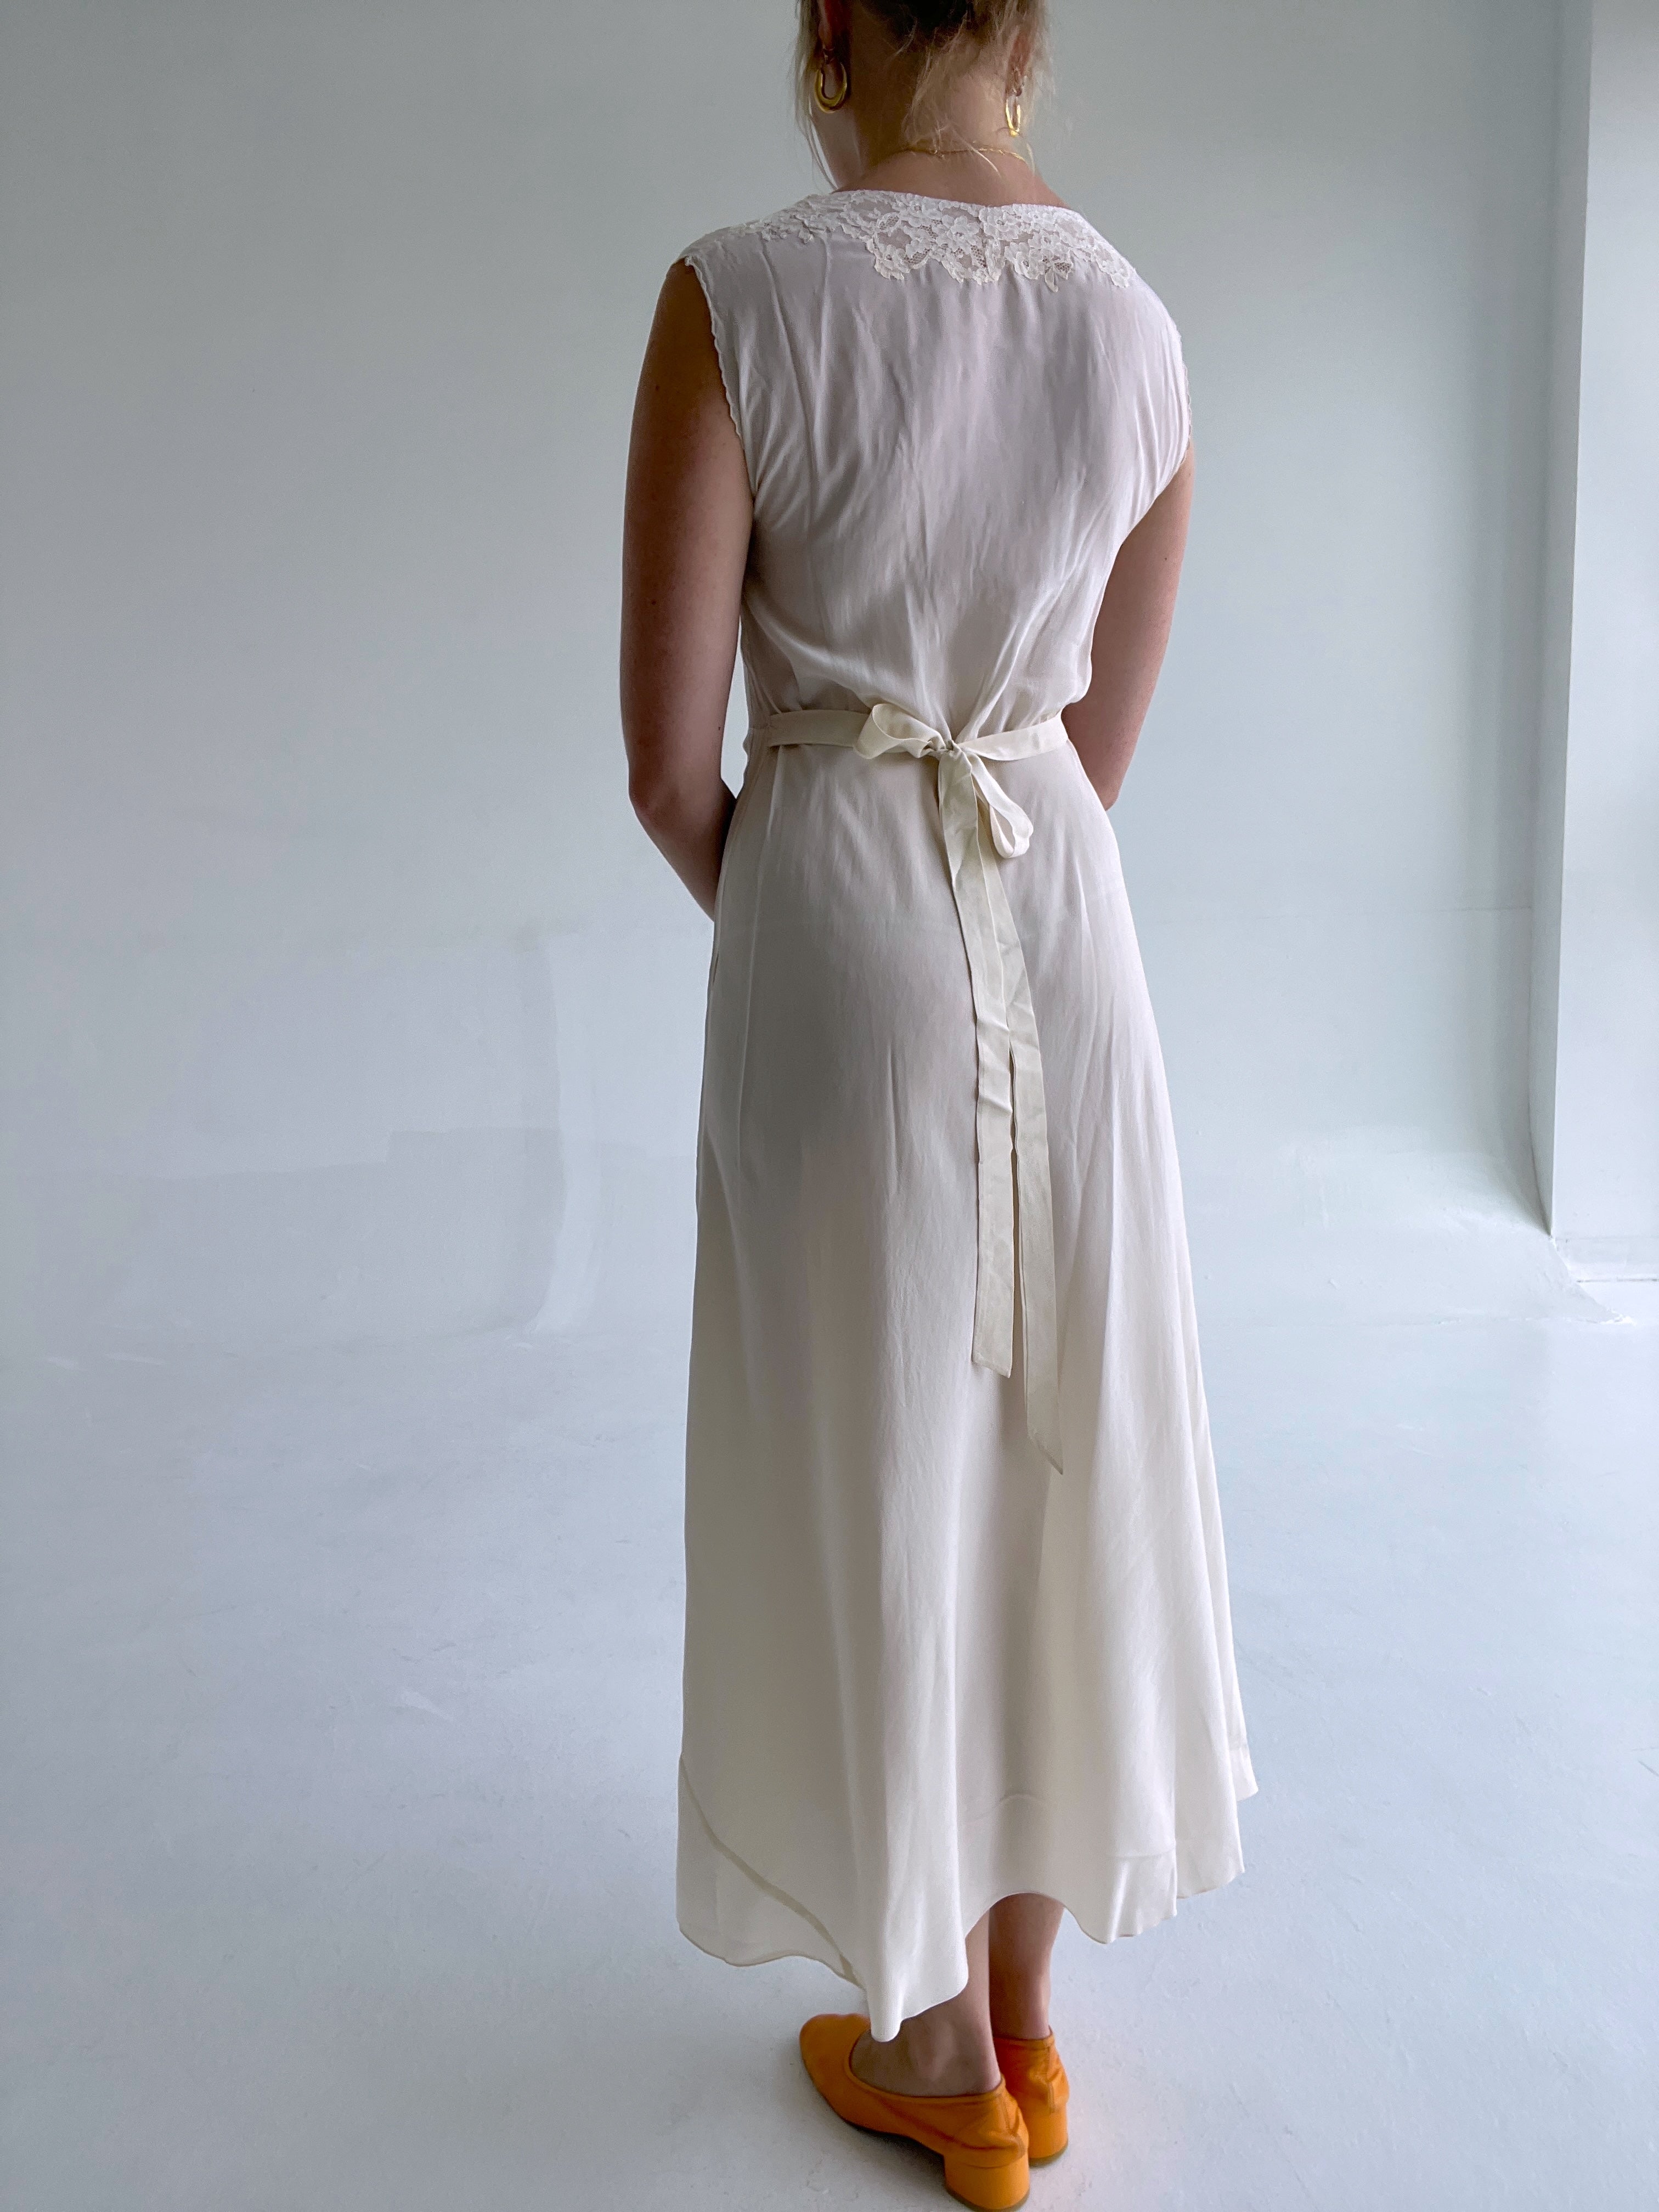 1930's Off White Silk Slip Dress with Lace